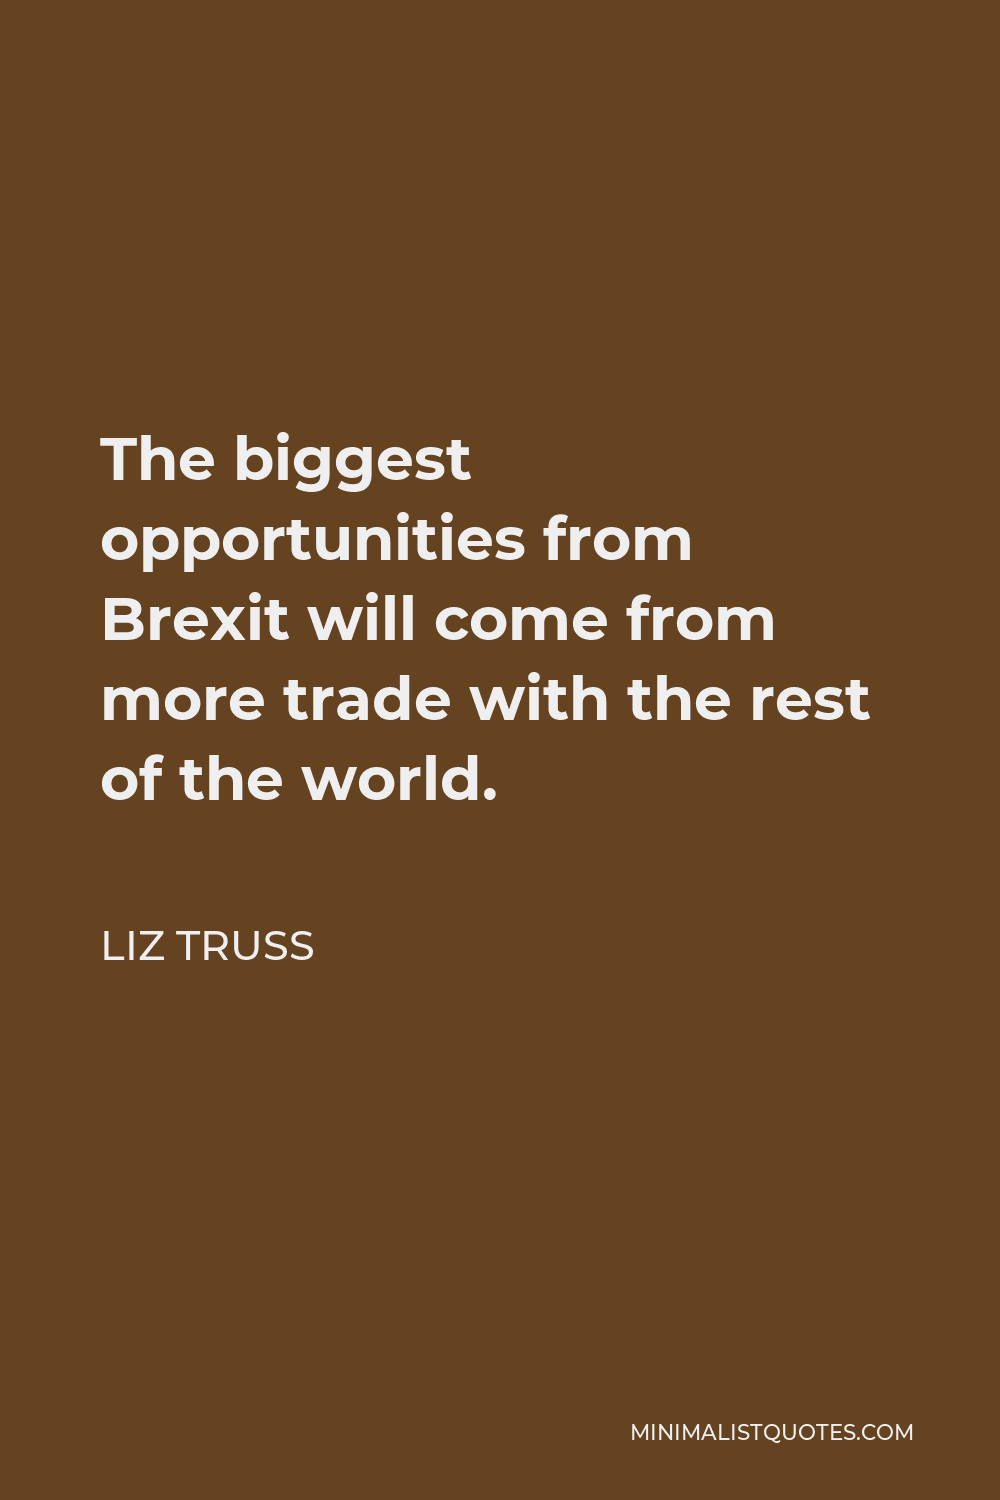 Liz Truss Quote - The biggest opportunities from Brexit will come from more trade with the rest of the world.